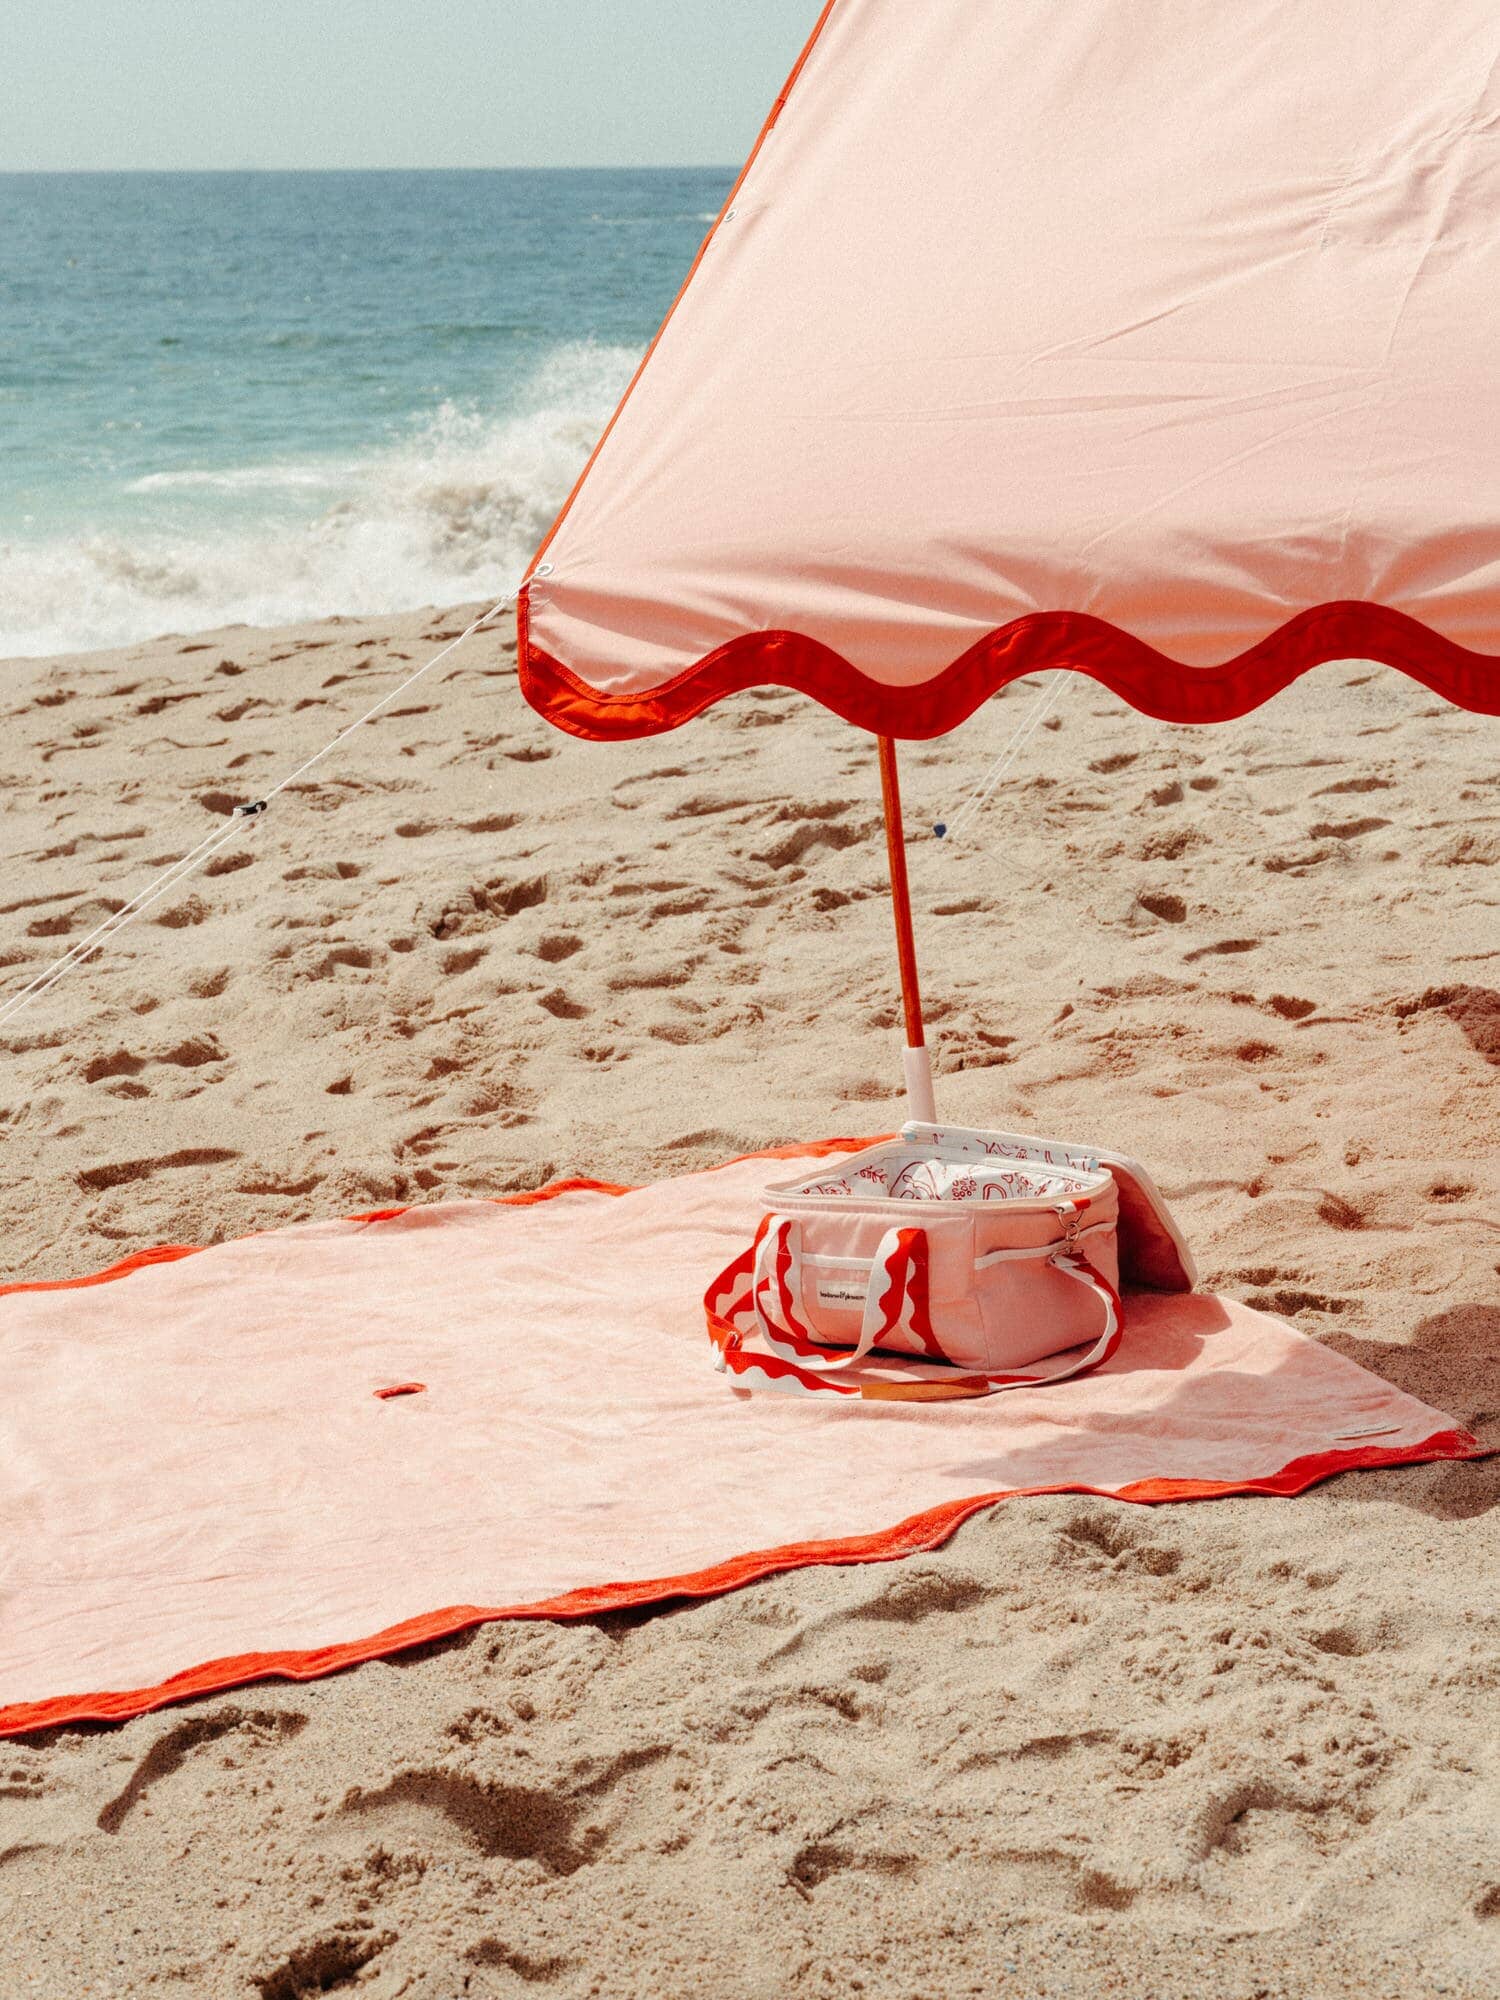 Beach set up with riviera beach tent, blanket & cooler